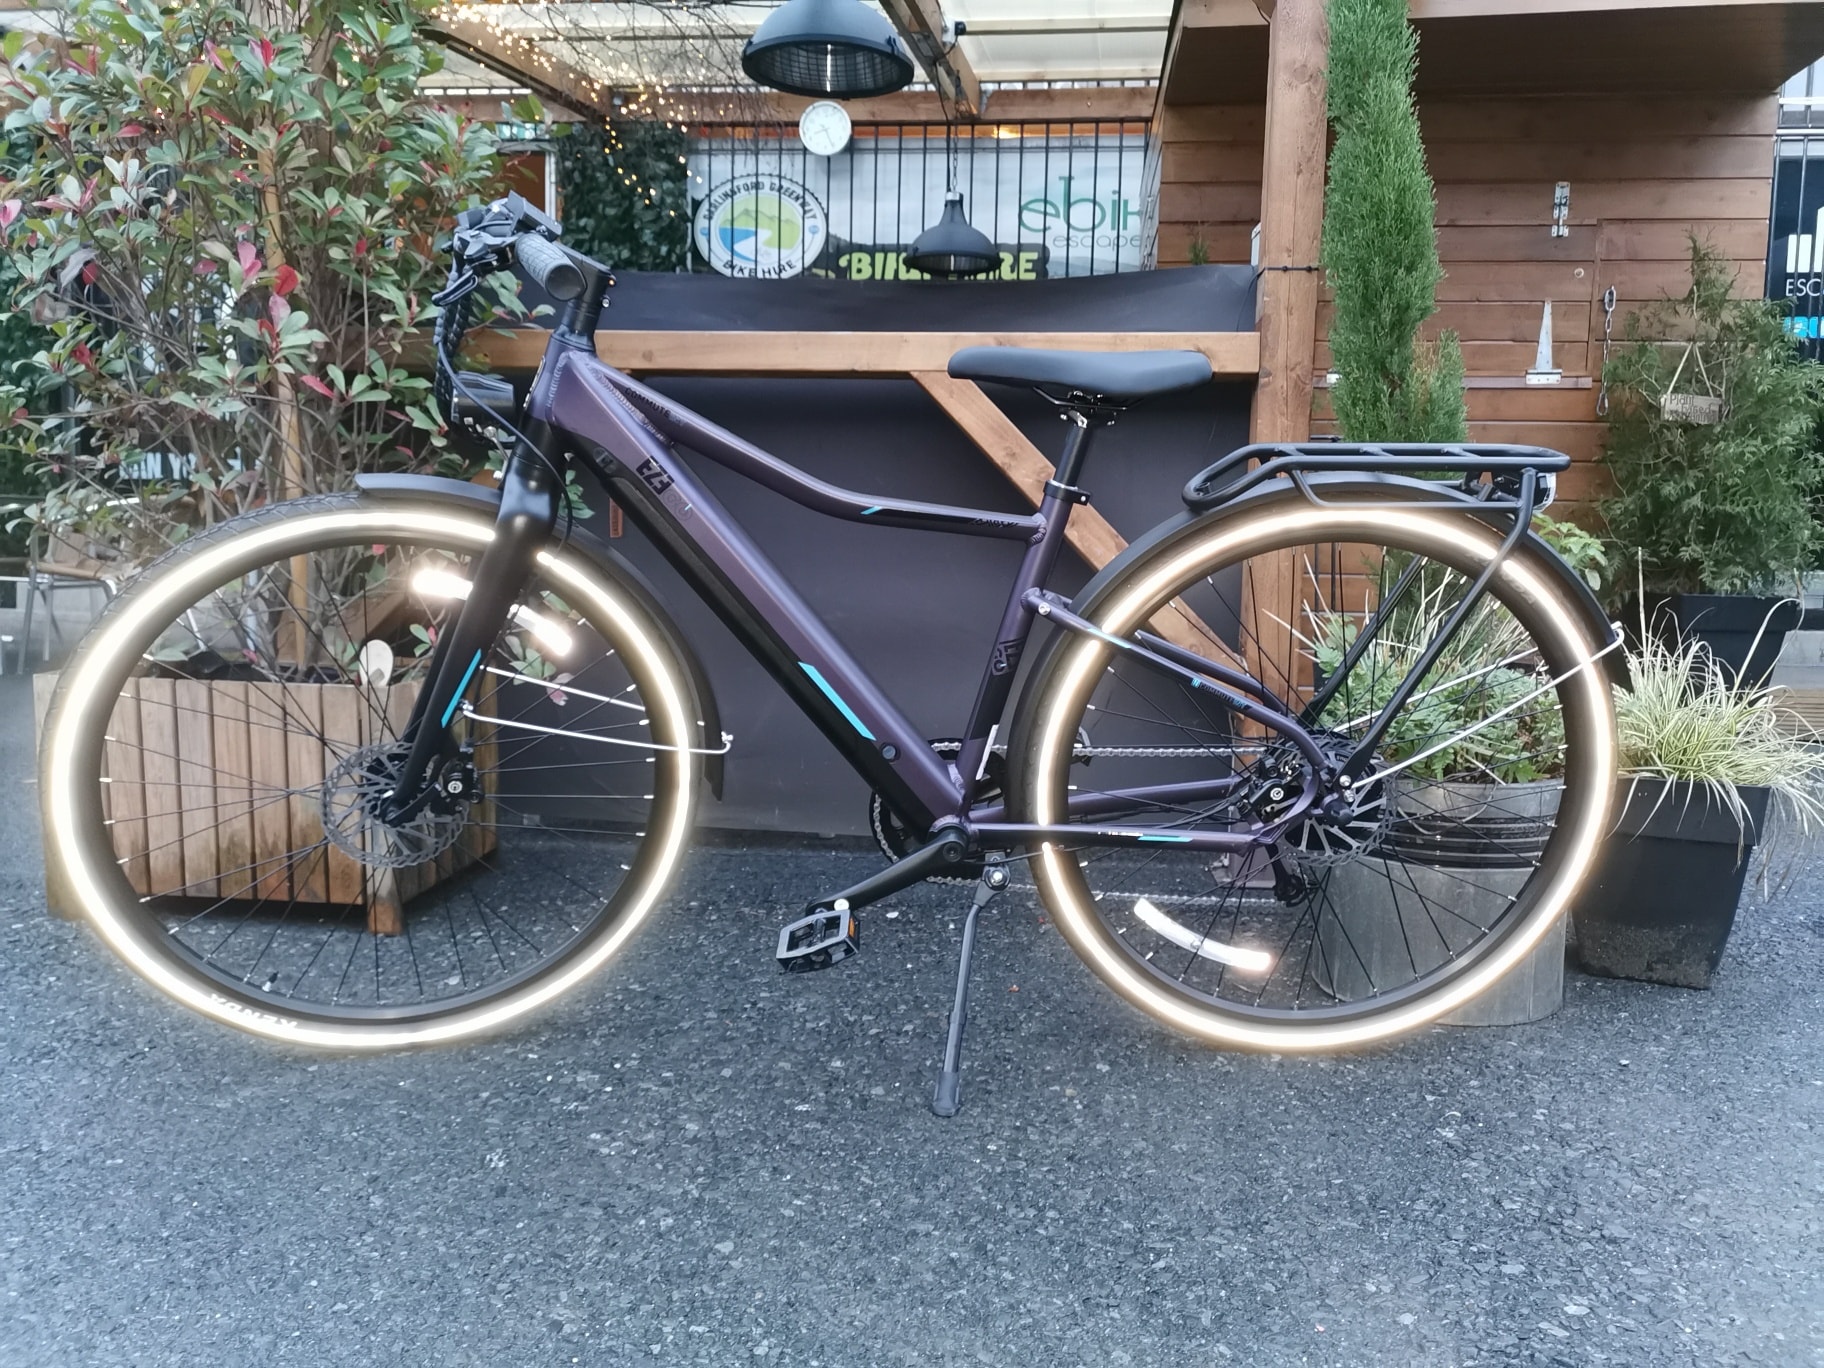 <span  class="uc_style_uc_tiles_grid_image_elementor_uc_items_attribute_title" style="color:#ffffff;">ebike 2</span>